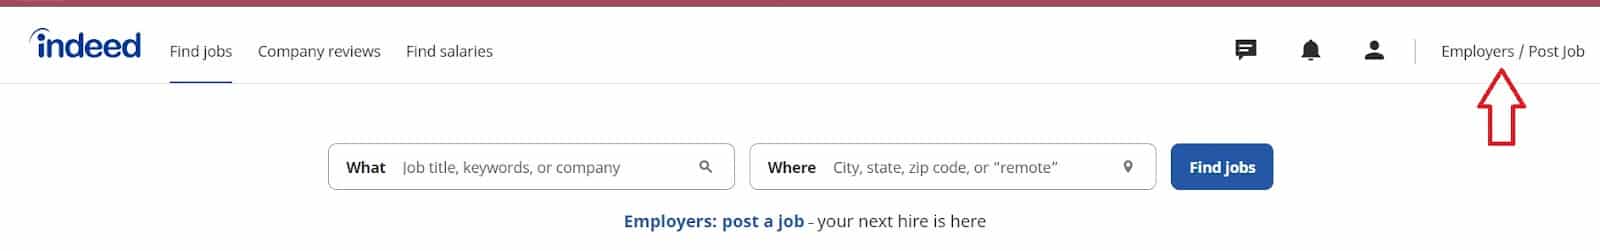 An sample image of Indeed for Employers or Post Job option to post a free job.